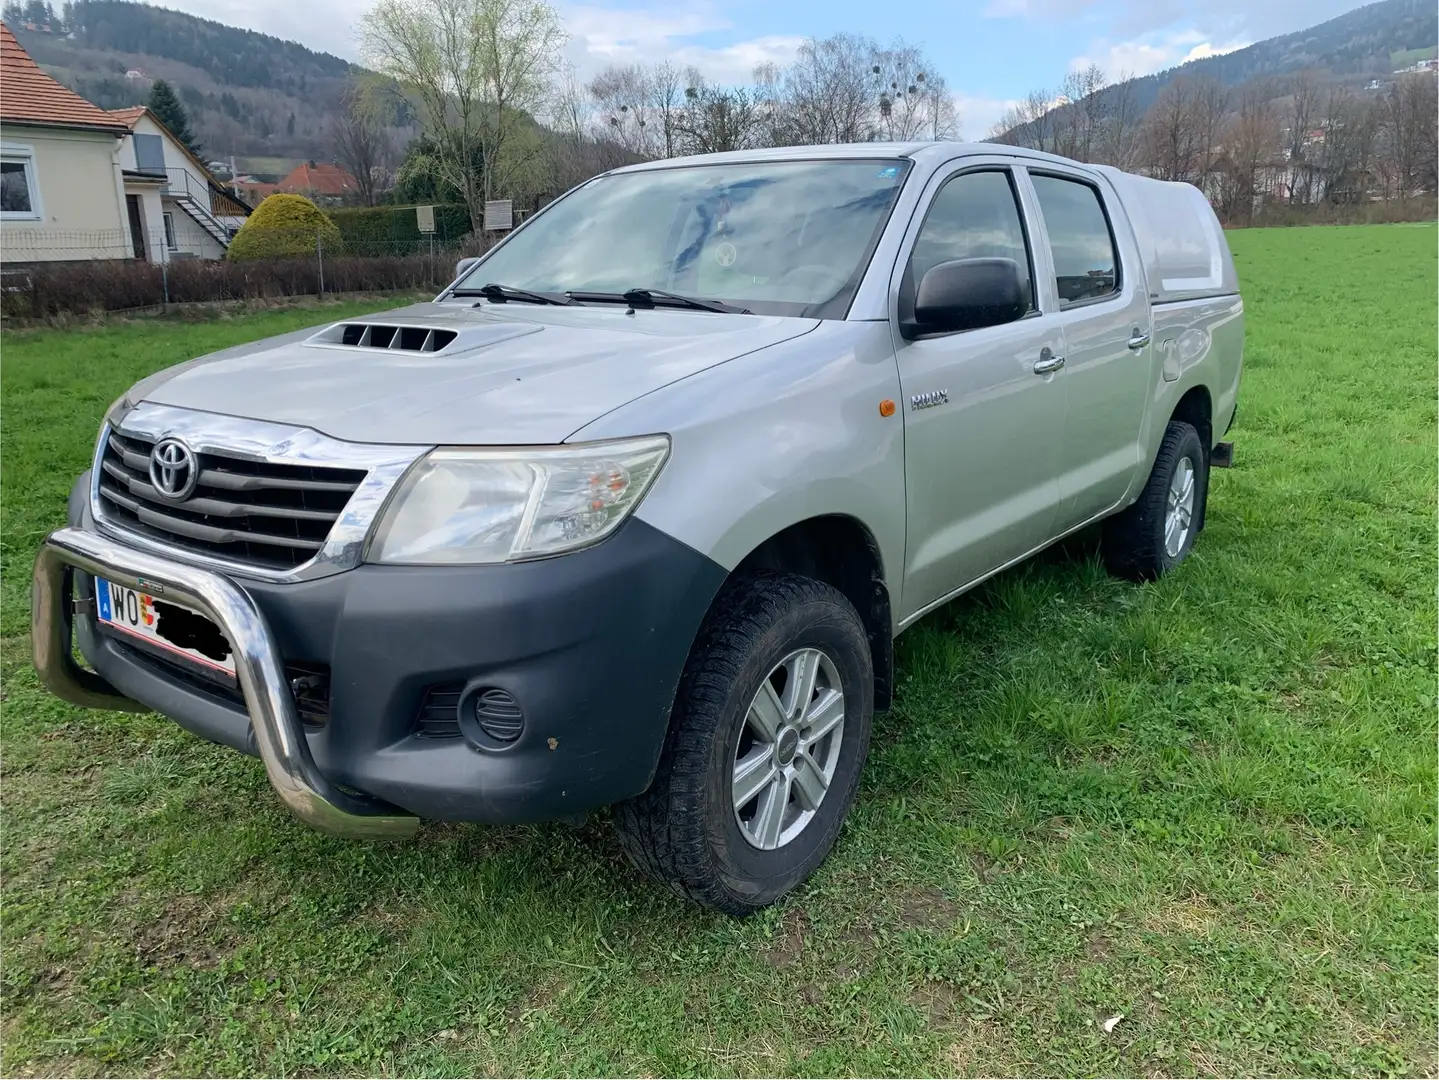 Toyota Hilux 2.5l 4x4 Country Grijs - 1